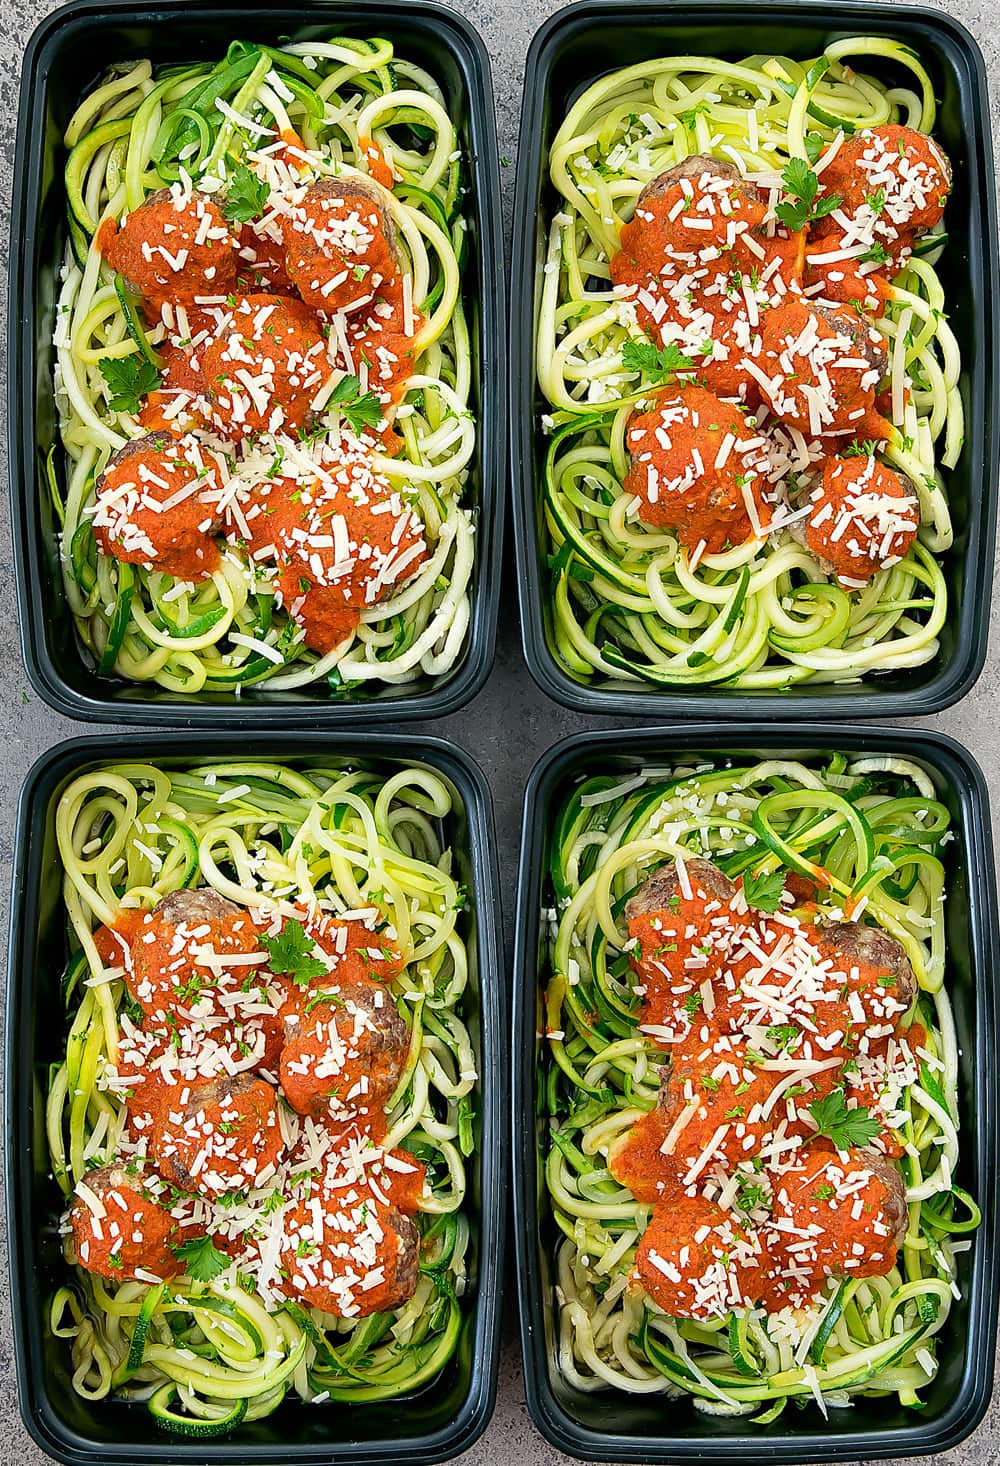 Low Carb Keto Recipes Meals
 Zucchini Noodles with Meatballs Meal Prep Keto Low Carb